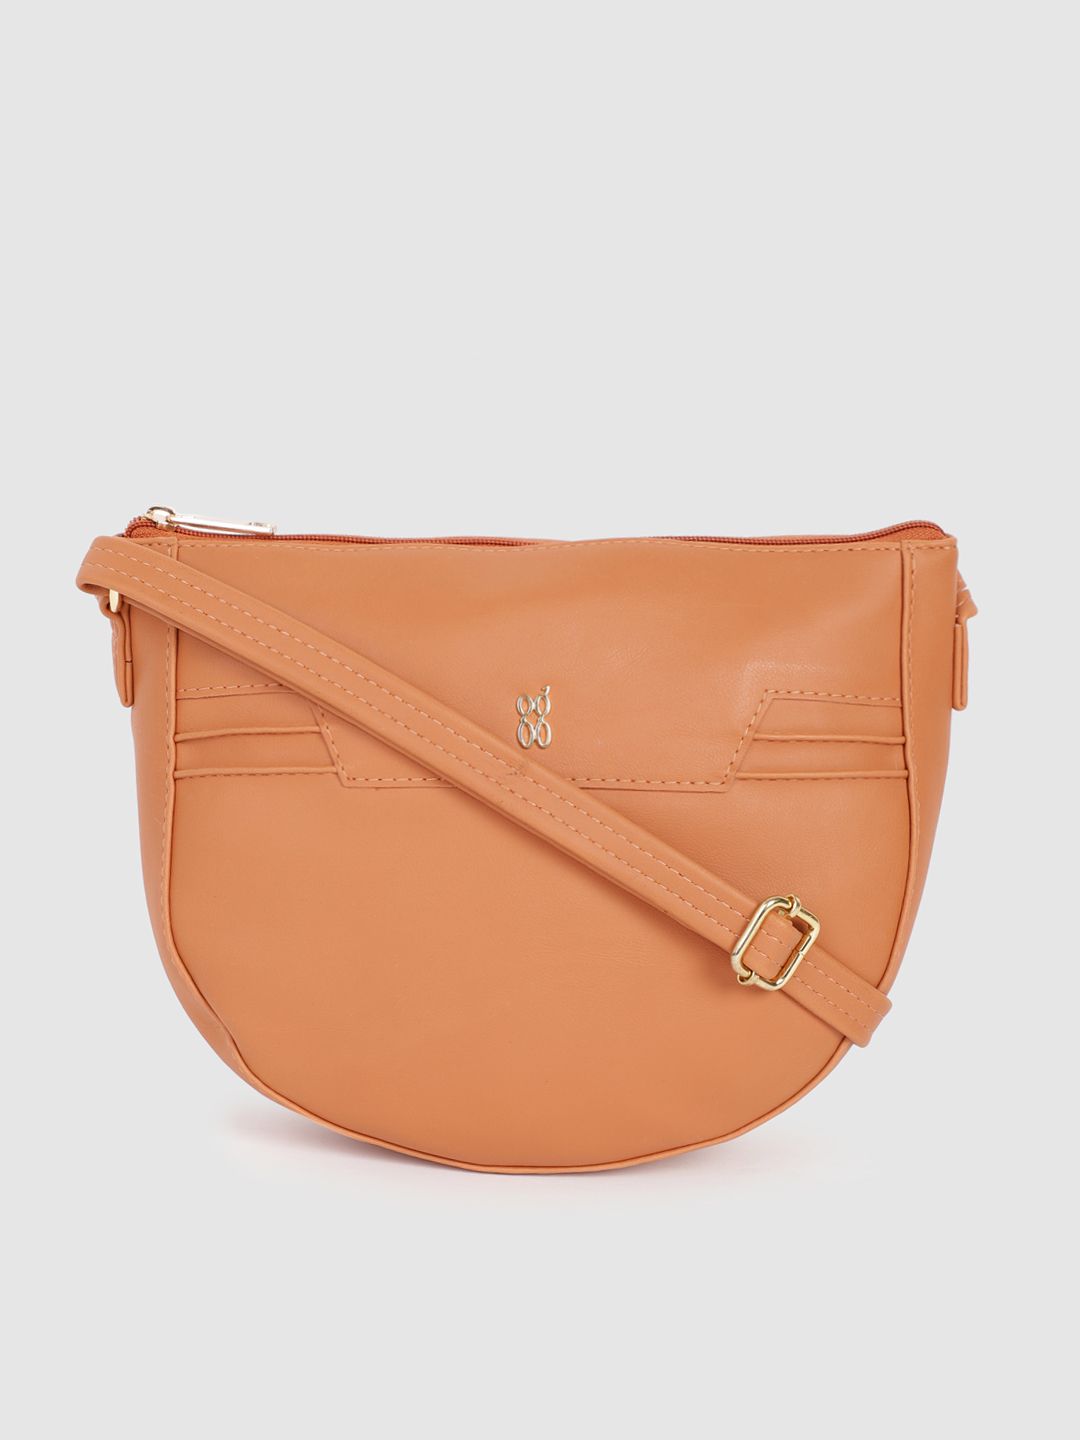 Baggit Peach-Coloured Solid TENDY E DIEGO Sling Bag Price in India